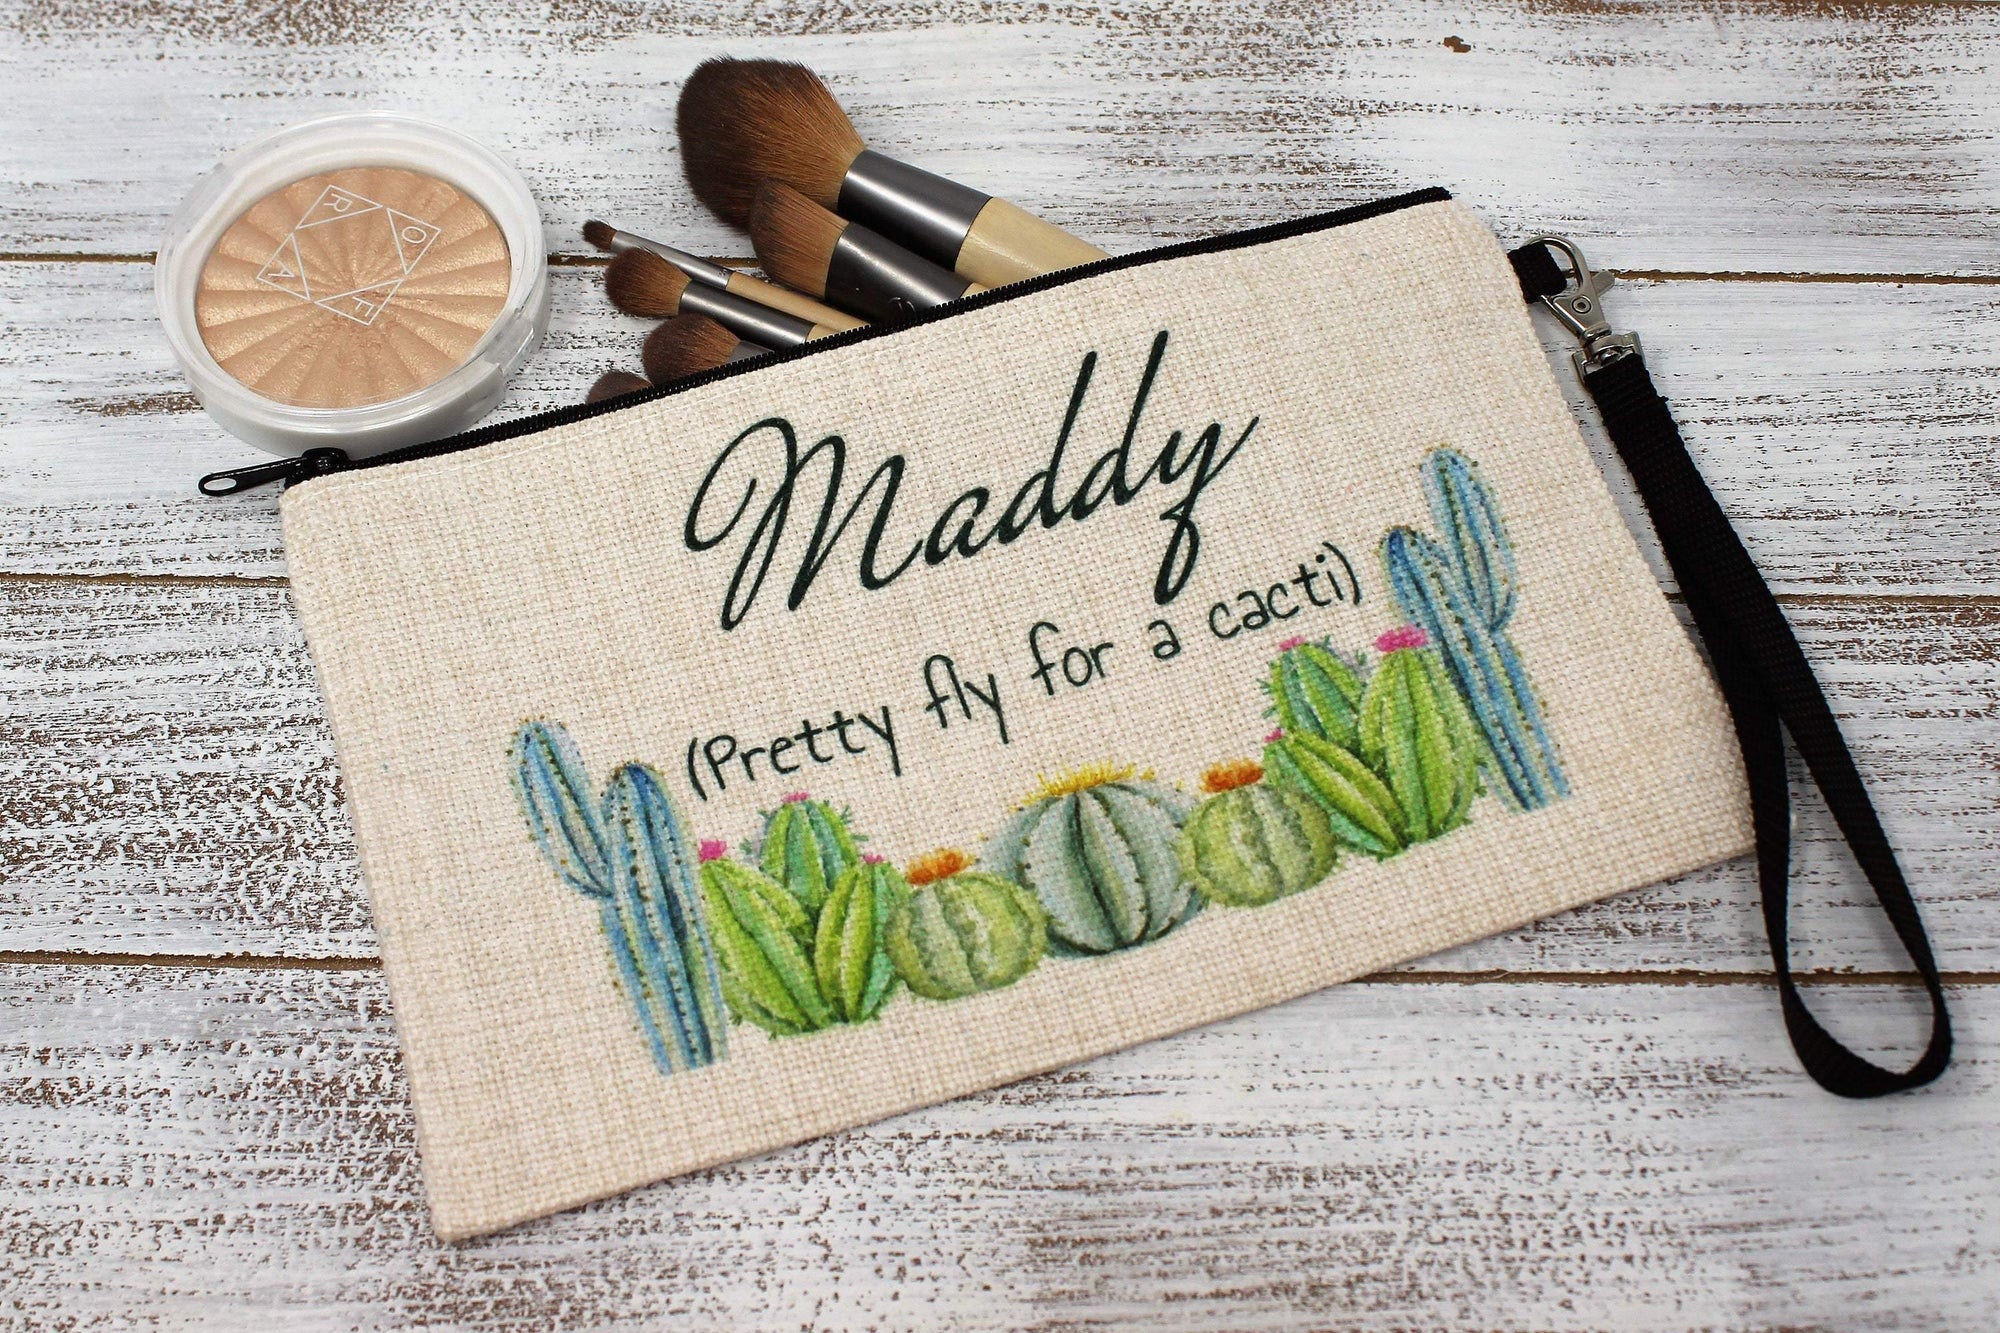 Personalized Cosmetic Bags | Custom Cosmetic Bags | Pretty Fly for a Cacti - This & That Solutions - Personalized Cosmetic Bags | Custom Cosmetic Bags | Pretty Fly for a Cacti - Personalized Gifts & Custom Home Decor